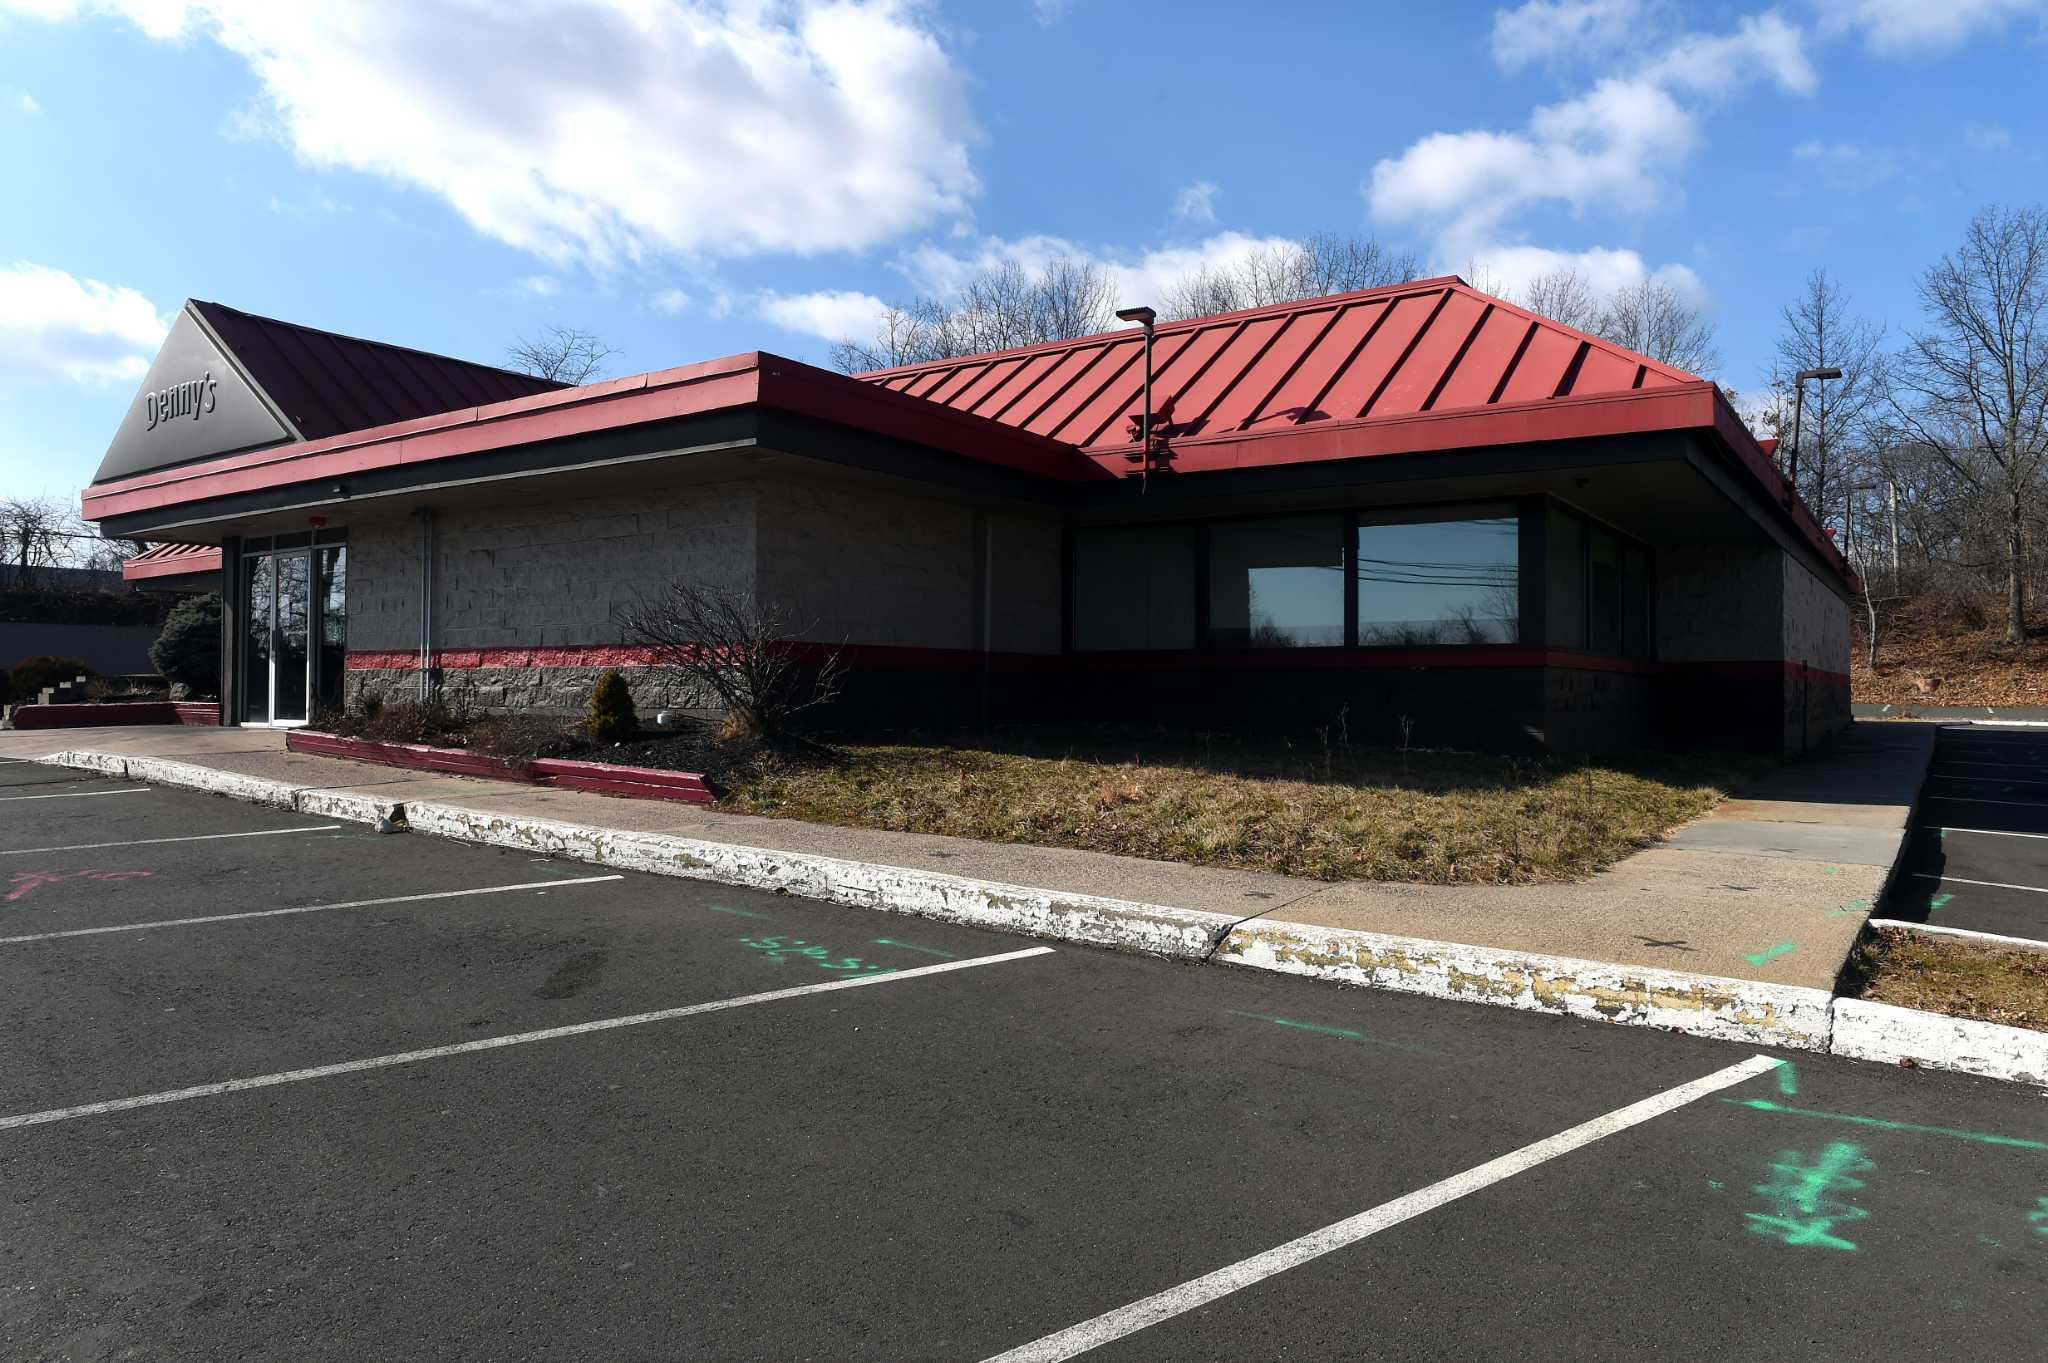 Denny's closes four CT locations in less than two months